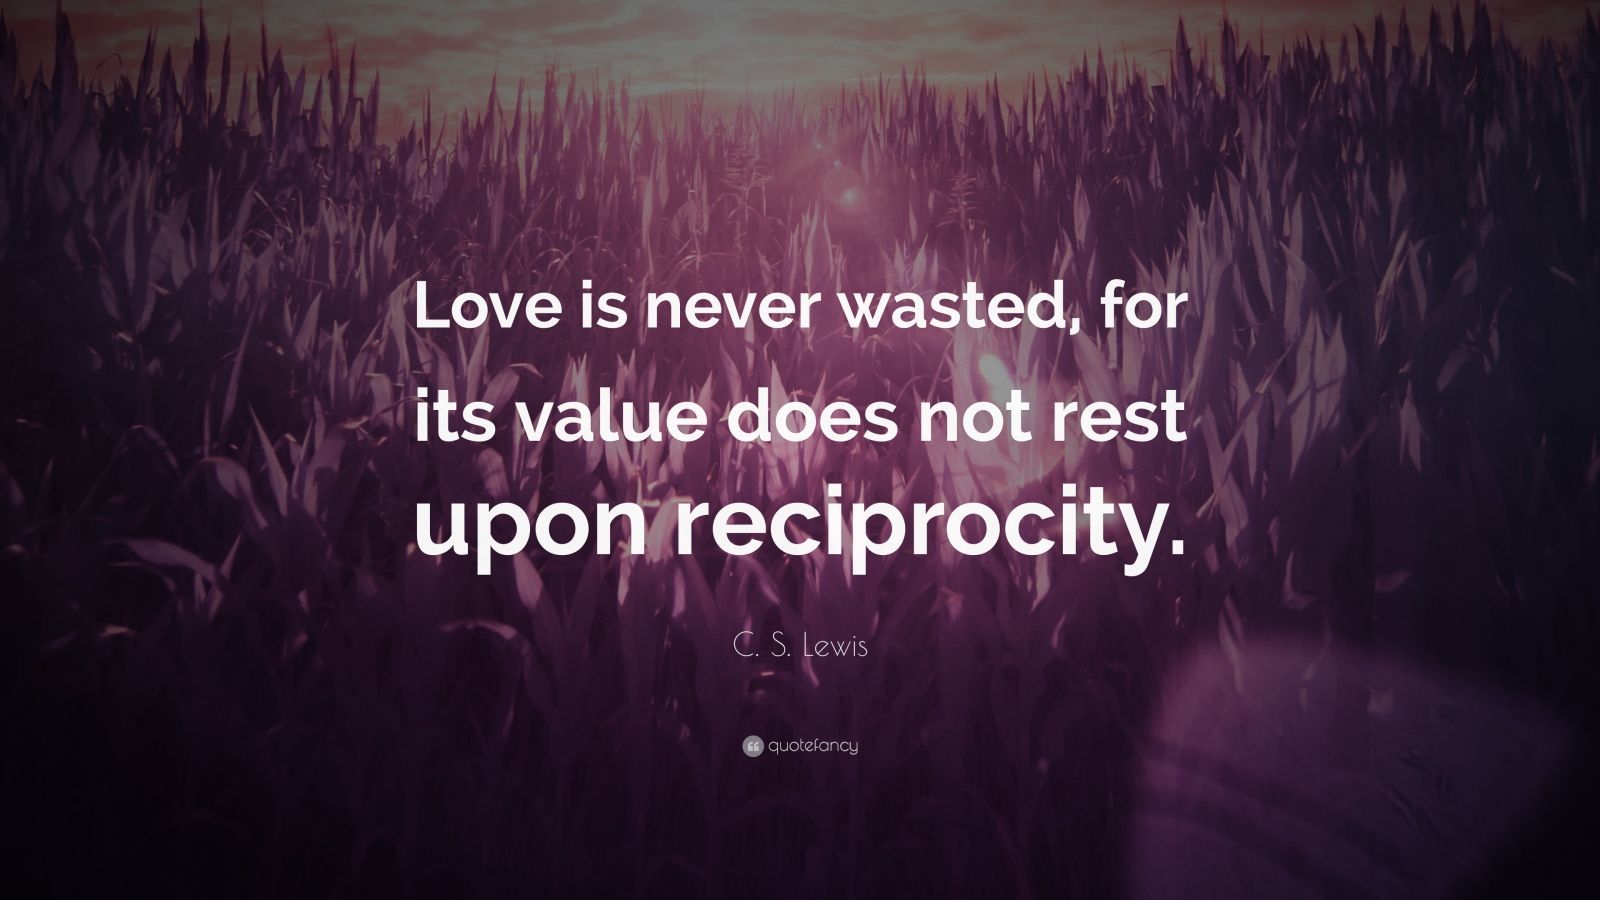 C. S. Lewis Quote “Love is never wasted, for its value